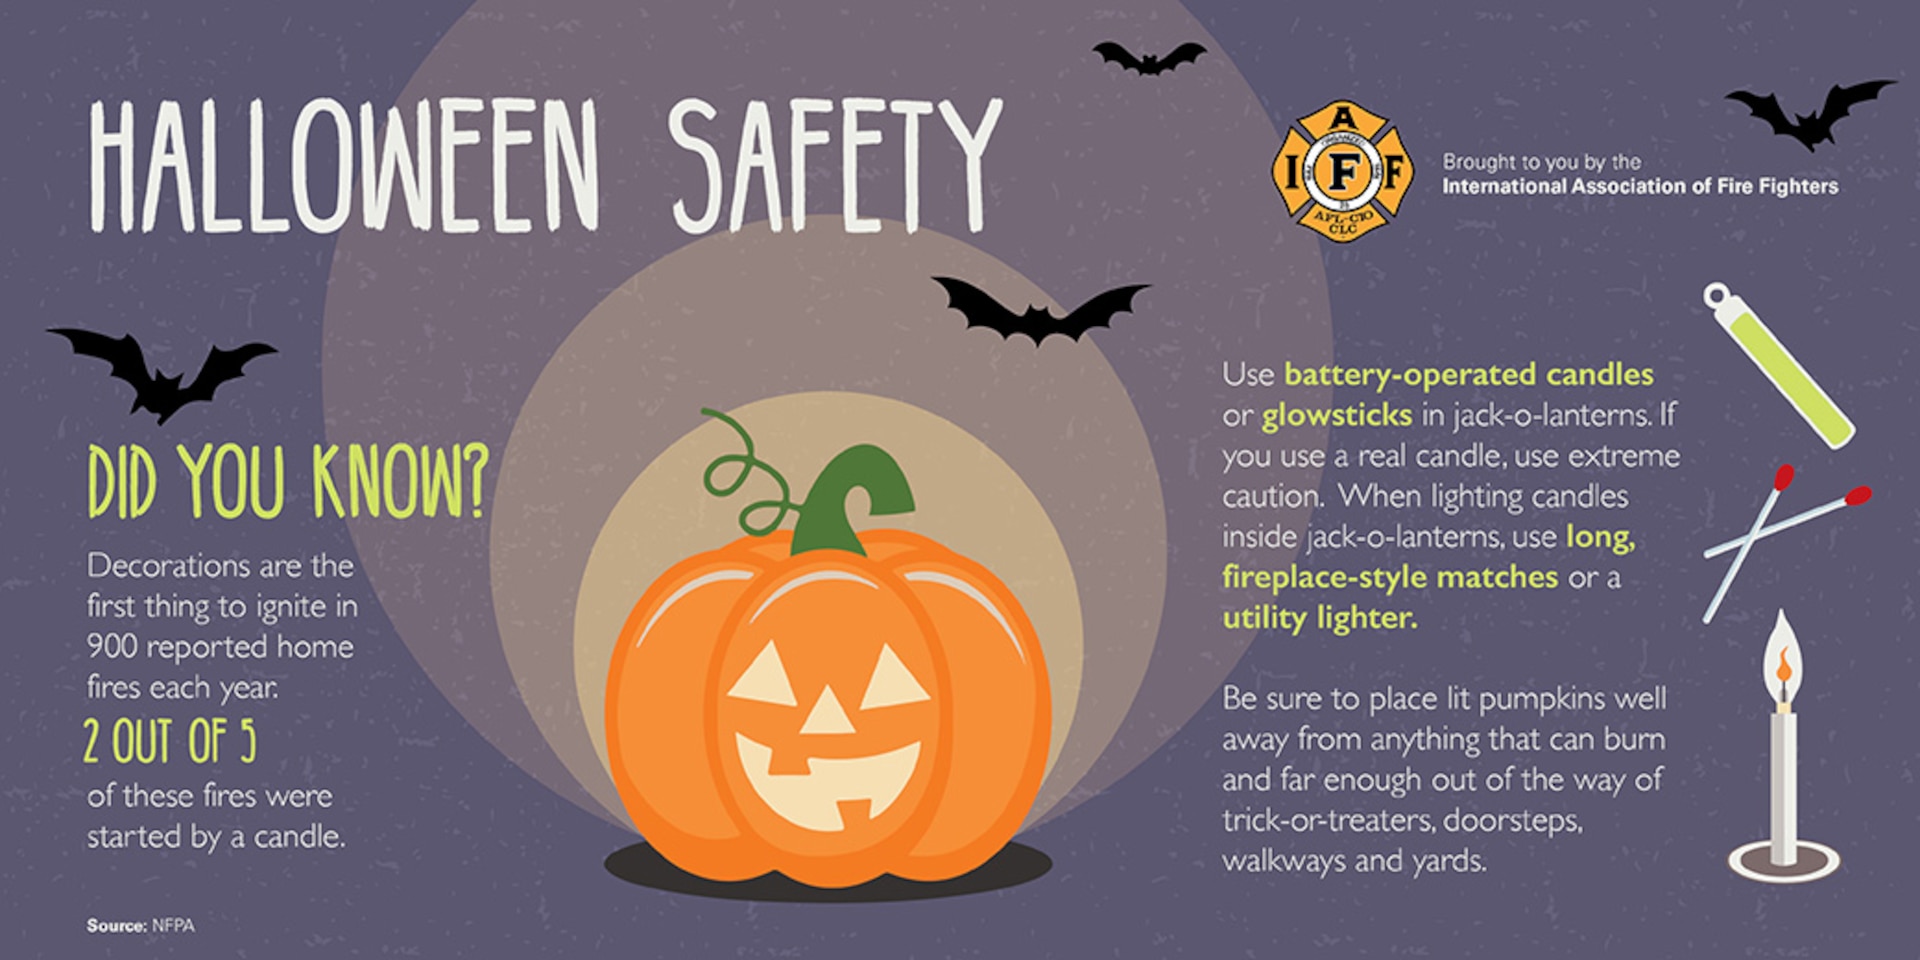 Joint Base San Antonio Fire Emergency Services advises parents to follow some safety tips for Halloween.